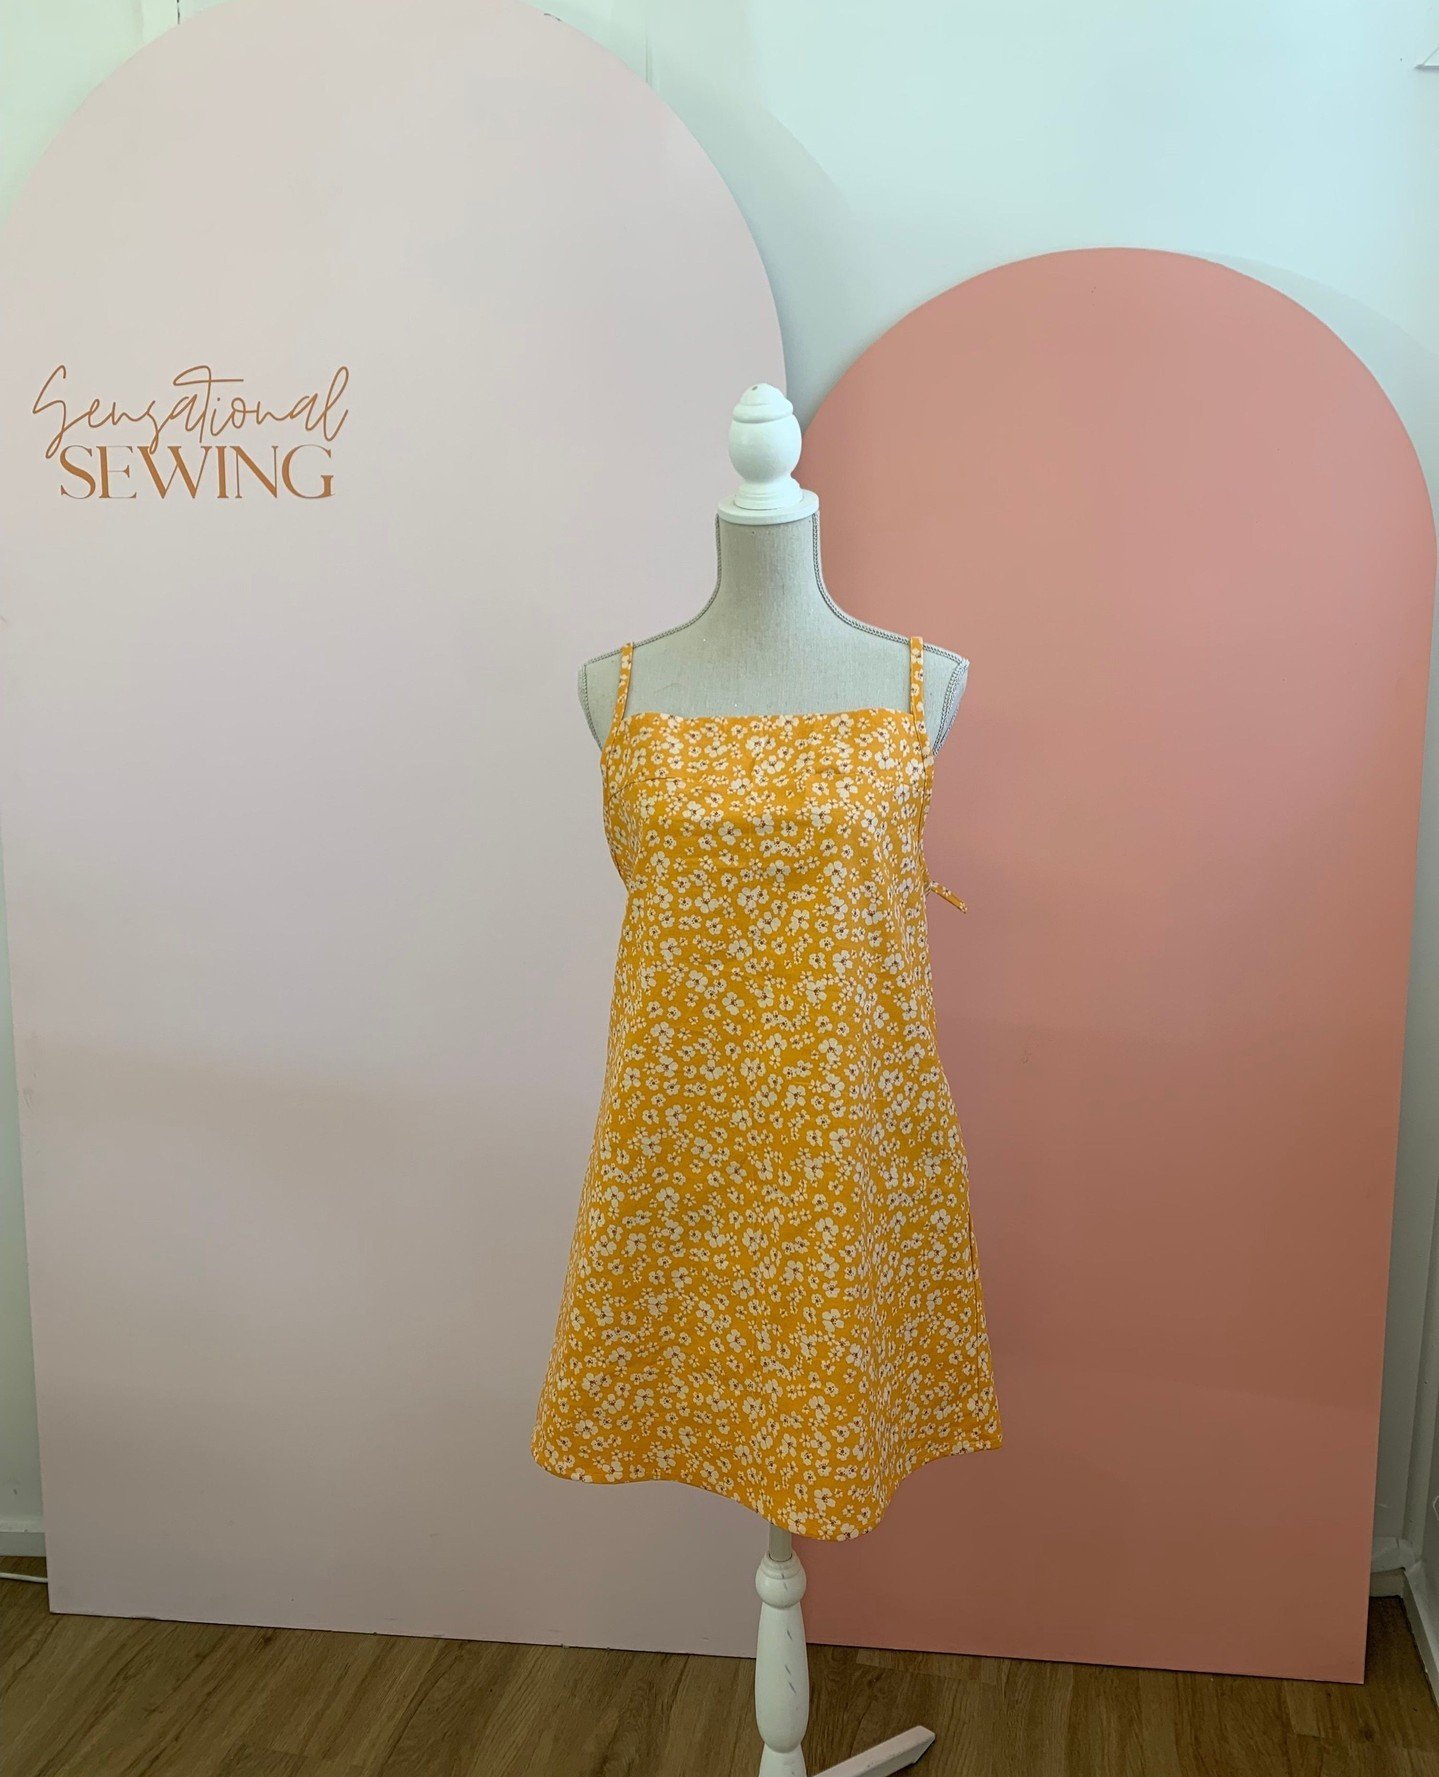 If you were wondering what we get up to in our sewing classes here's a sneak peak! In March we saw some wonderful creations, some of which featured in our monthly newsletters ✨️Sensational Sewing Showcase! ✨️⁠
Just look at this gorgeous yellow dress 